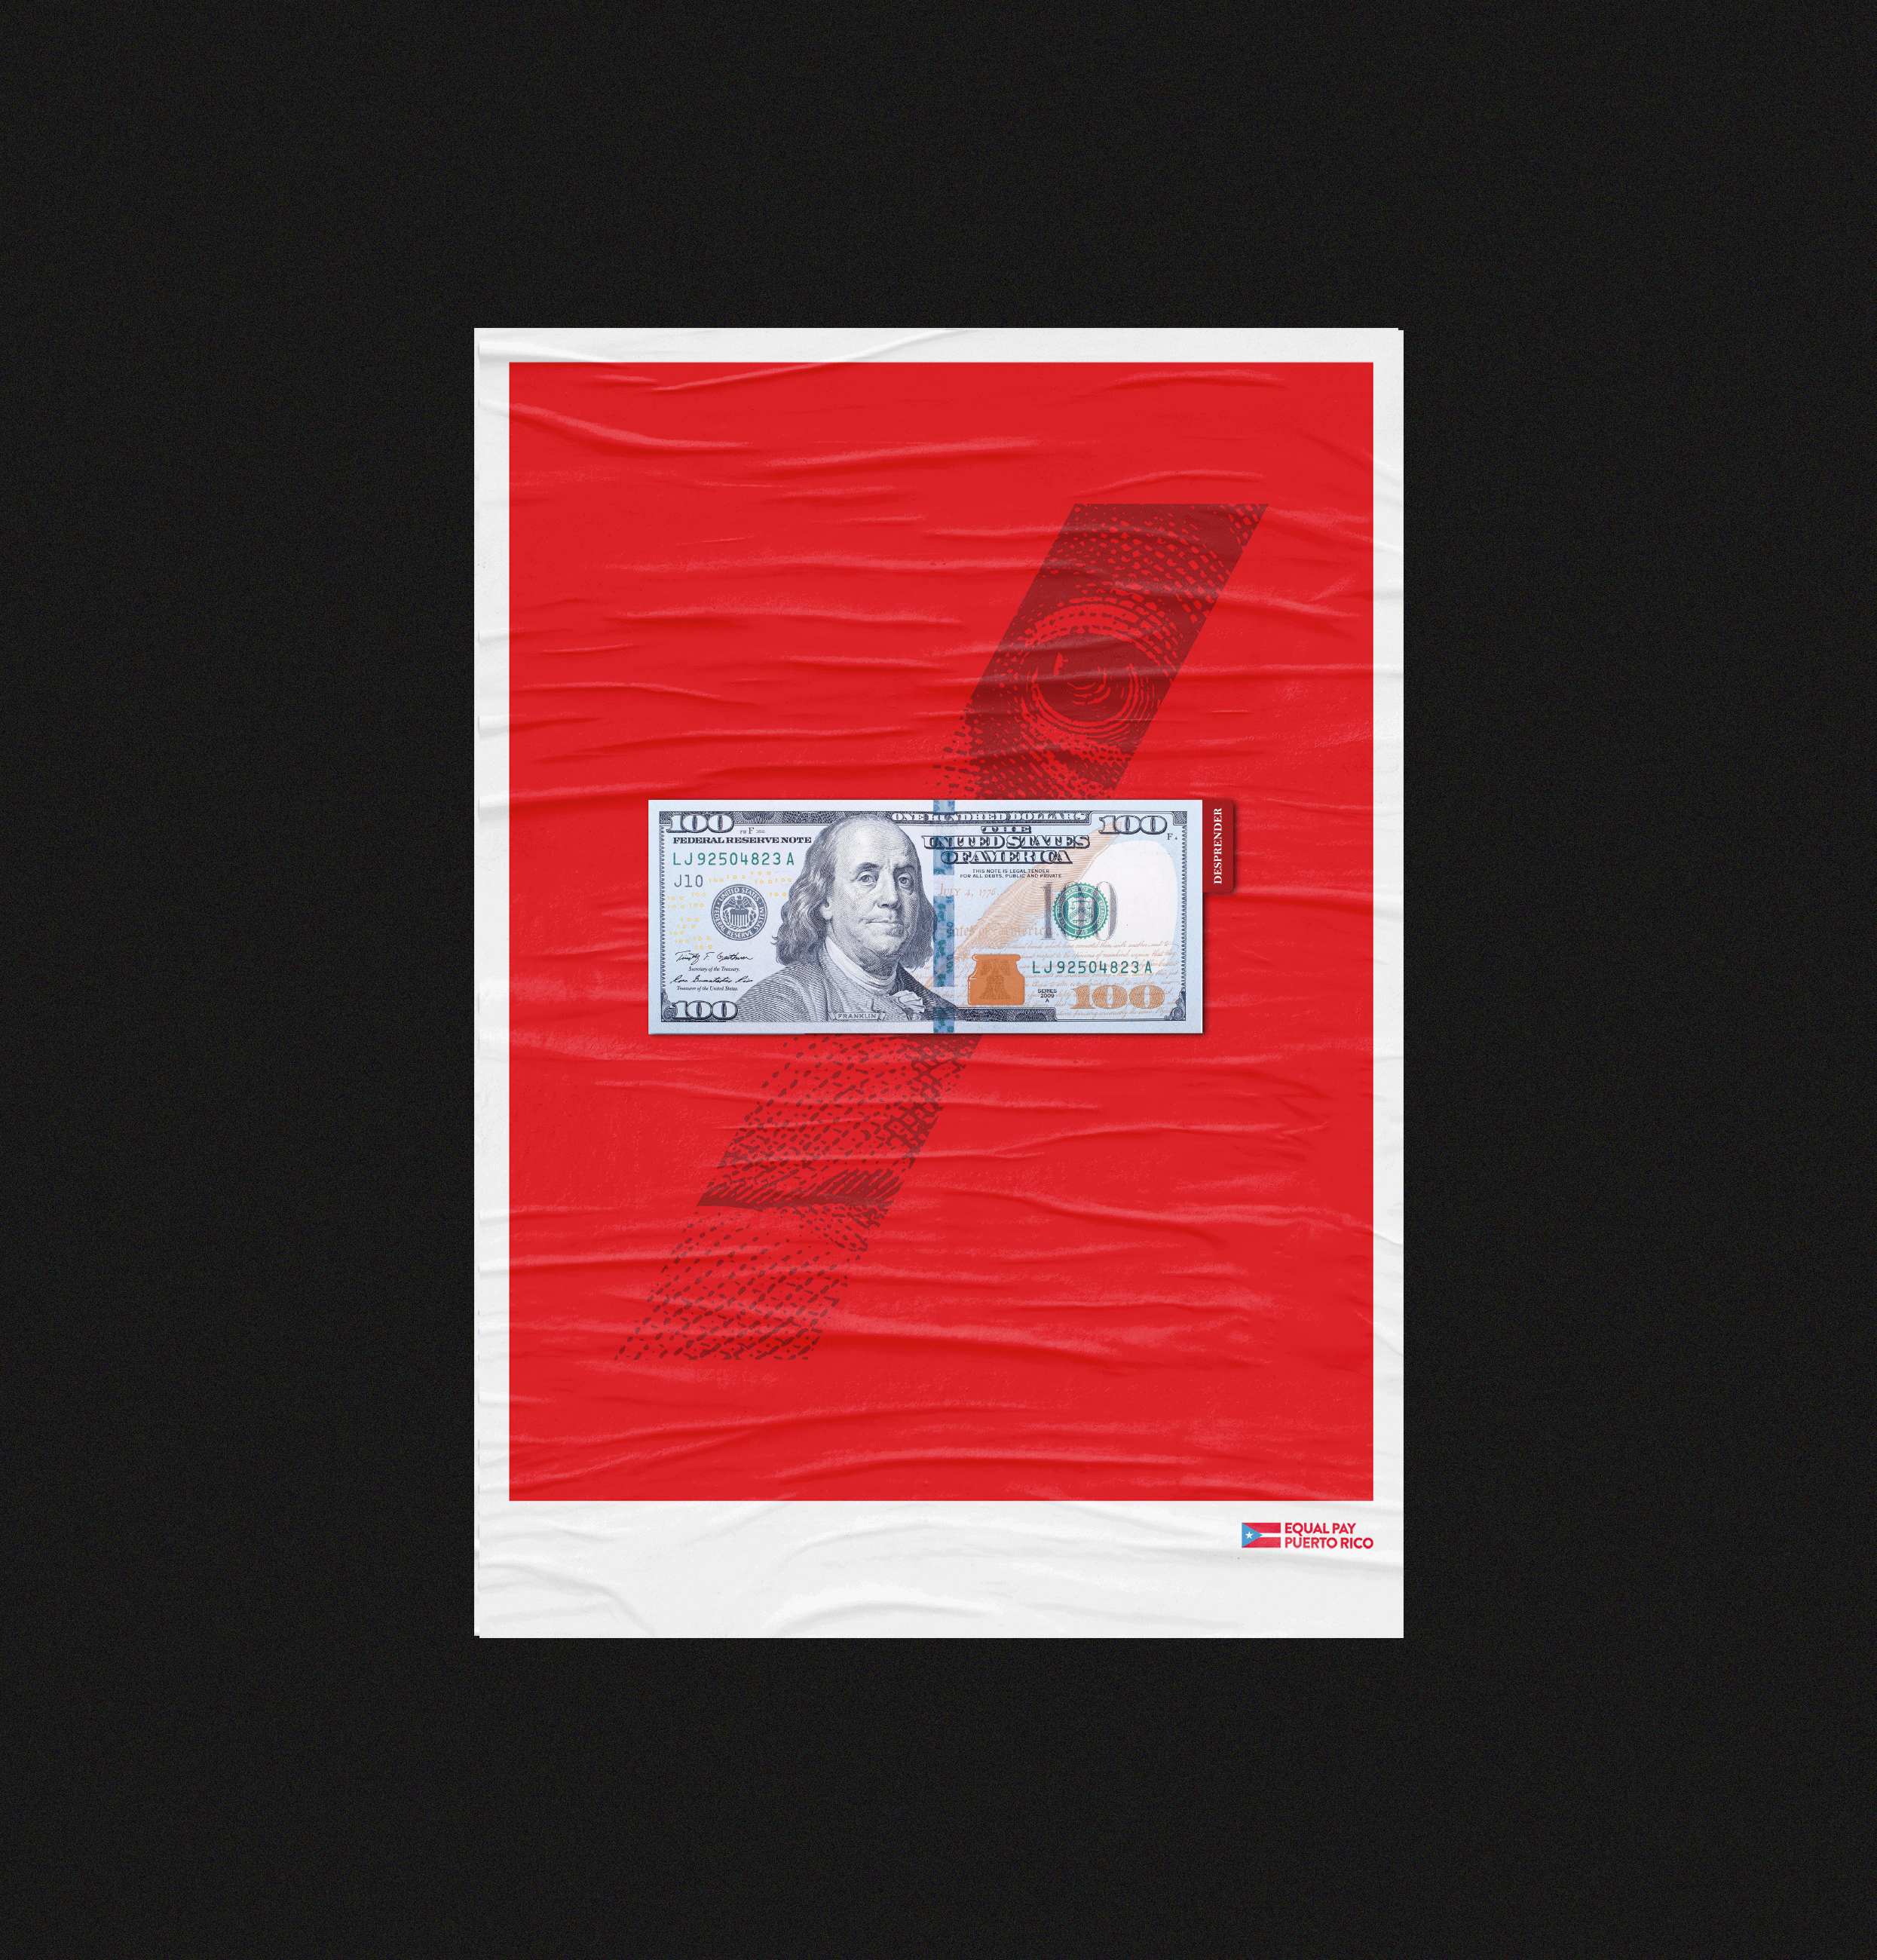 Pay Day - Equal Pay Puerto Rico / Cúspide 2018 art direction bold design design design inspiration equal pay graphic design interactive art interactive design interactive poster minimal design pay gap poster design poster inspiration social cause social change social justice